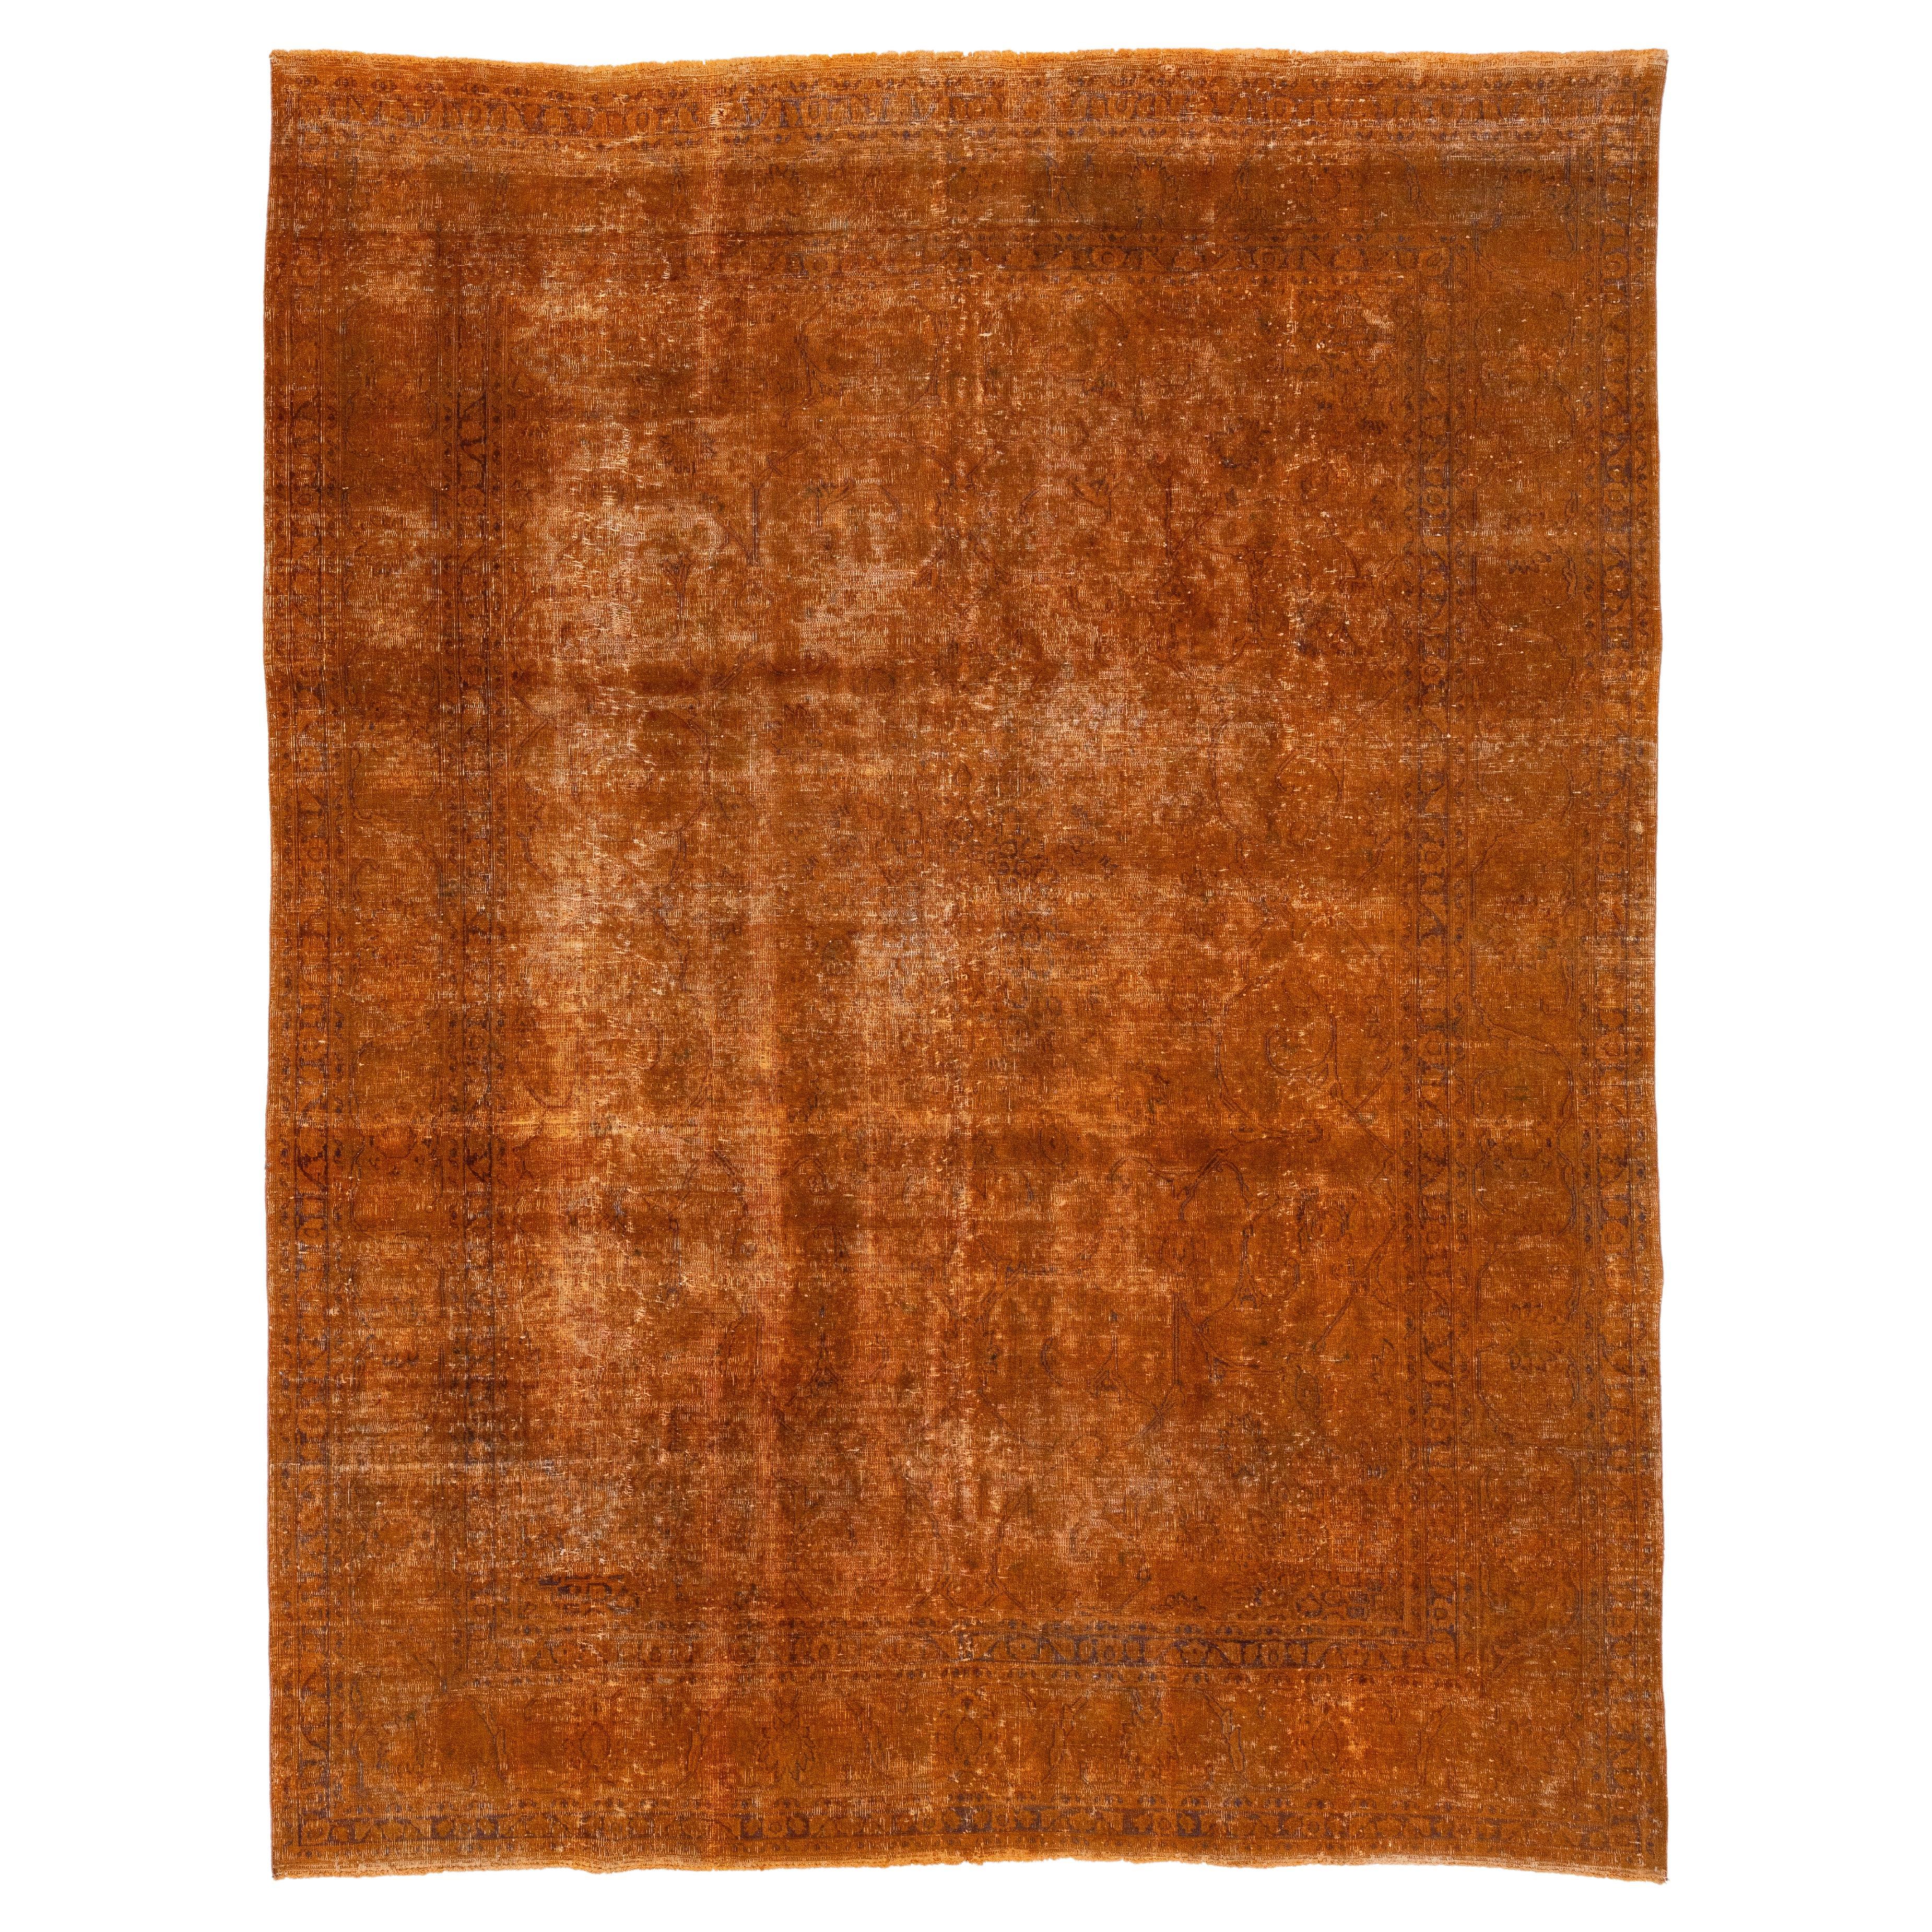 Allover Designed Antique Persian Overdyed Wool Rug In Orange For Sale